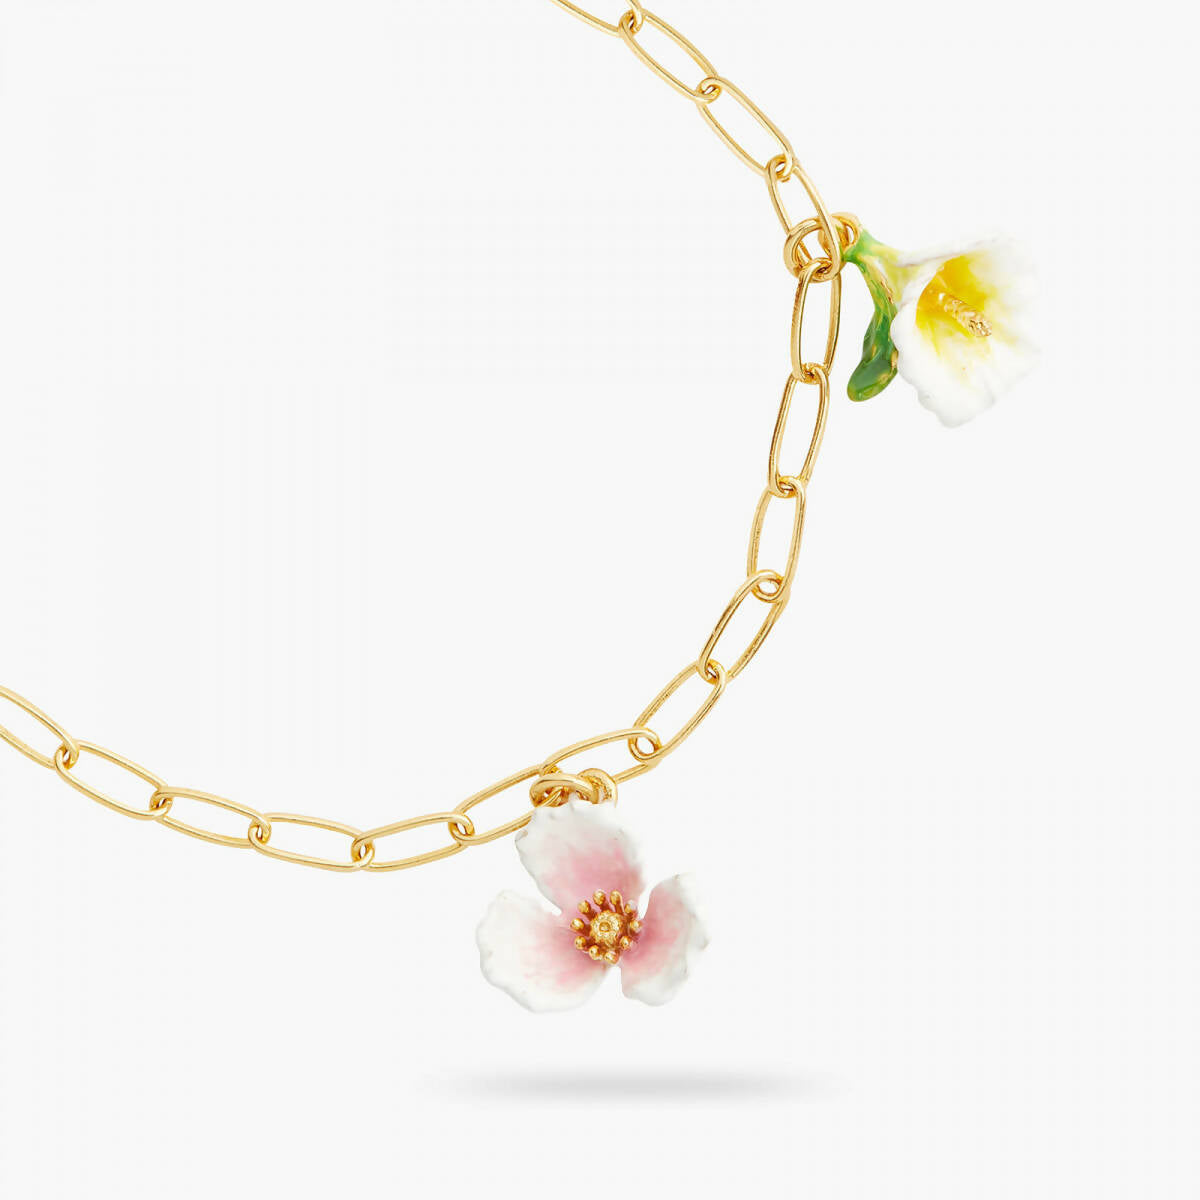 GOLD-PLATED LINKS AND FLOWER PENDANT BRACELET - Yooto